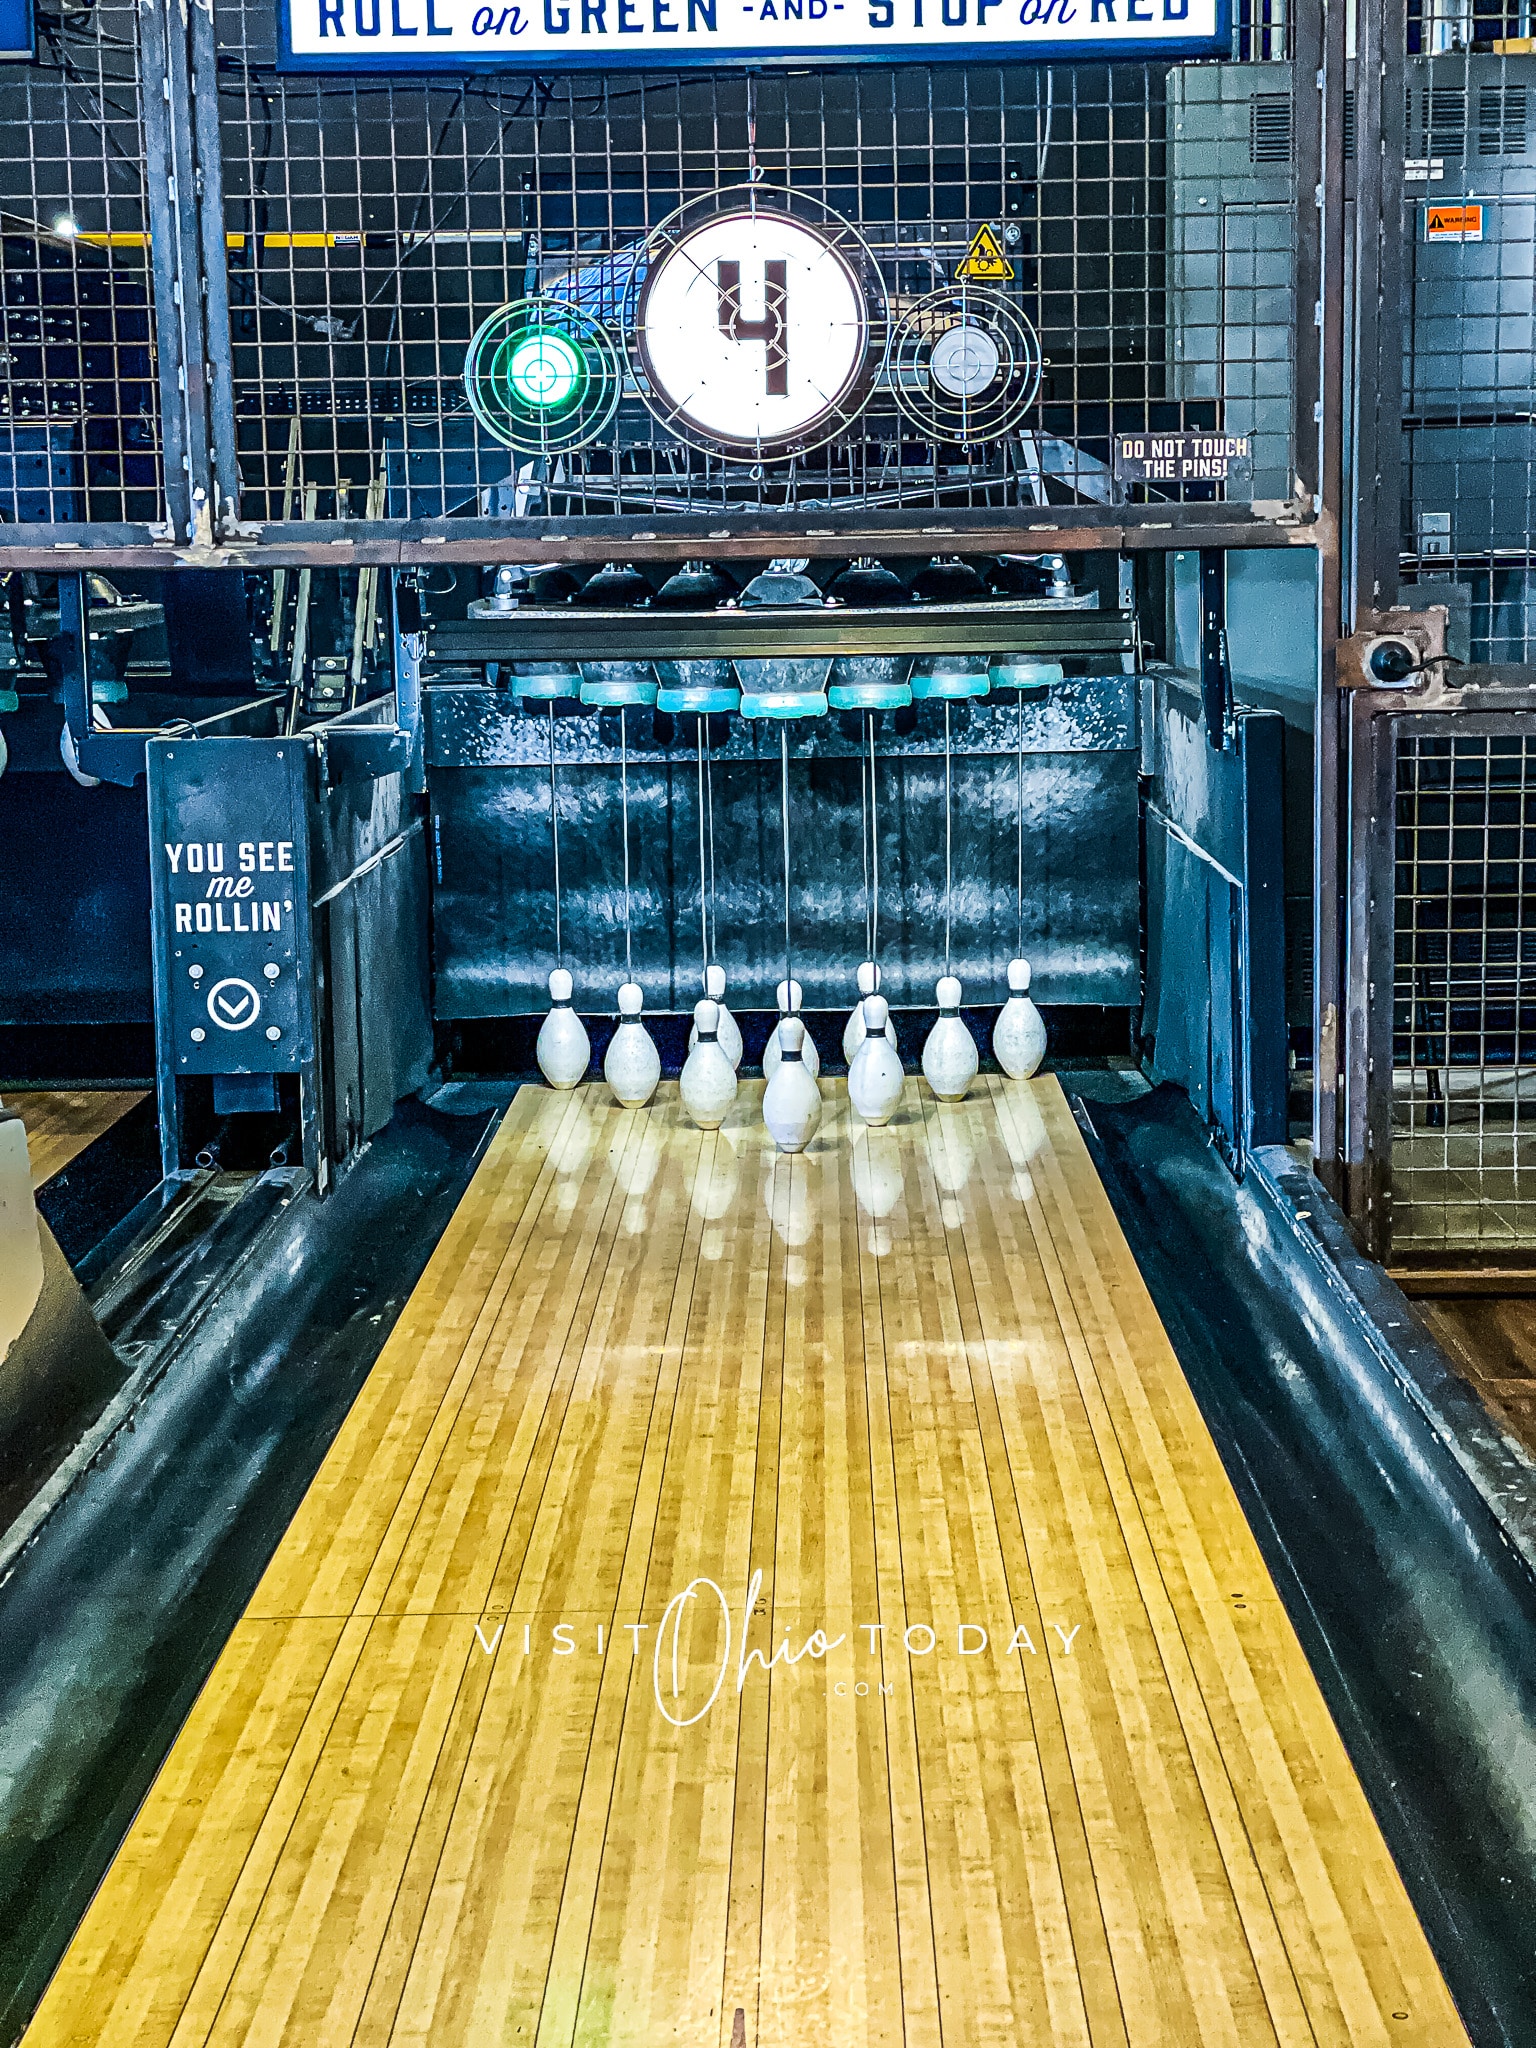 picture of a duck pin bowling alley. wooden brown floor with a #4 up top of the metal cage that is over the duck pins Photo credit: Cindy Gordon of VisitOhioToday.com